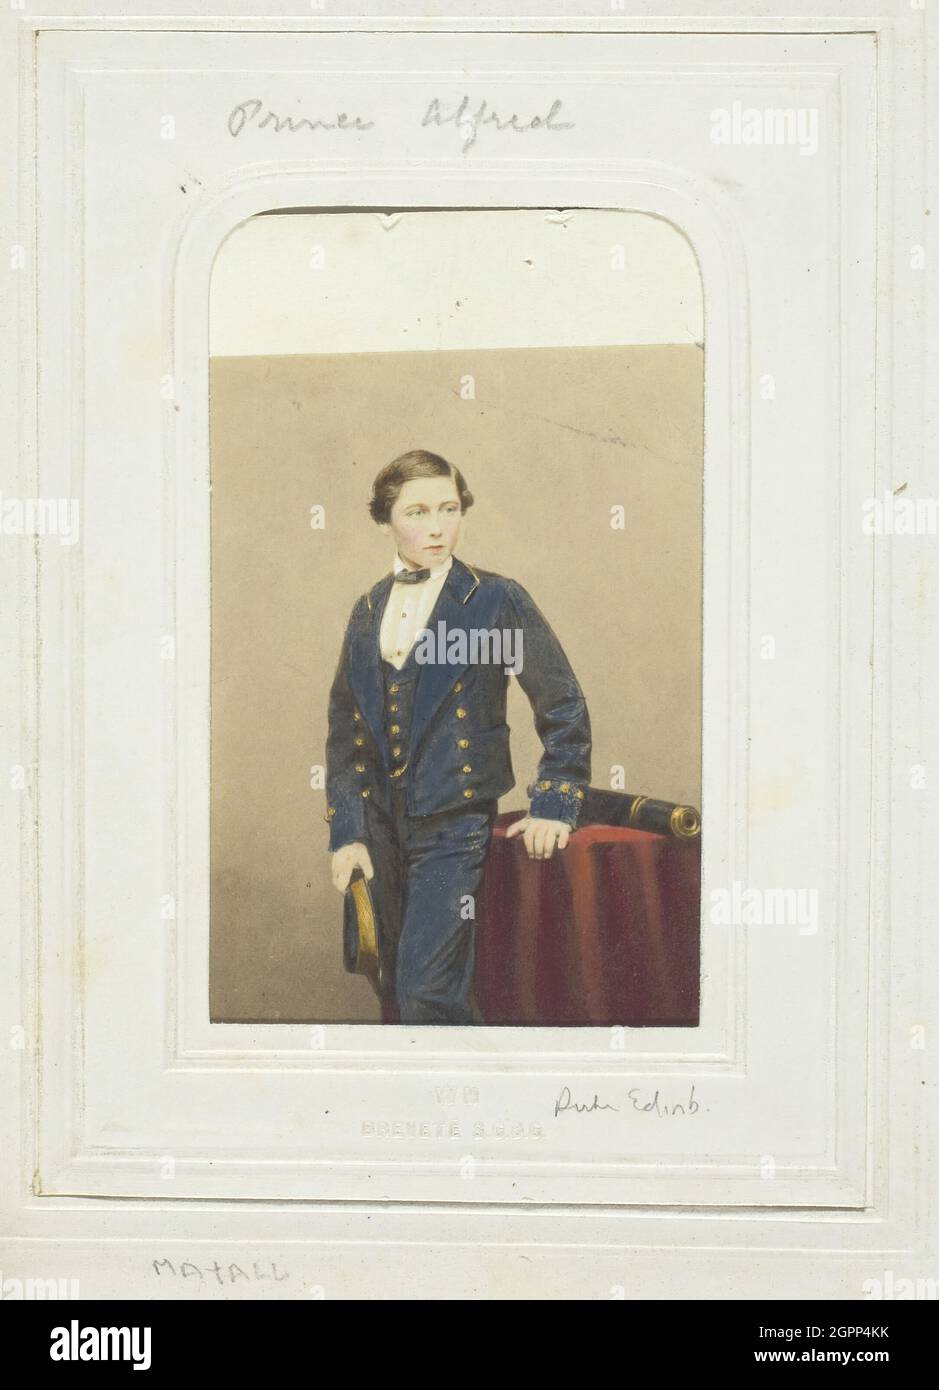 Prince Alfred, c. 1860. [Portrait of Prince Alfred, son of Queen Victoria, as a teenager and wearing naval cadet's uniform]. Albumen print. Stock Photo